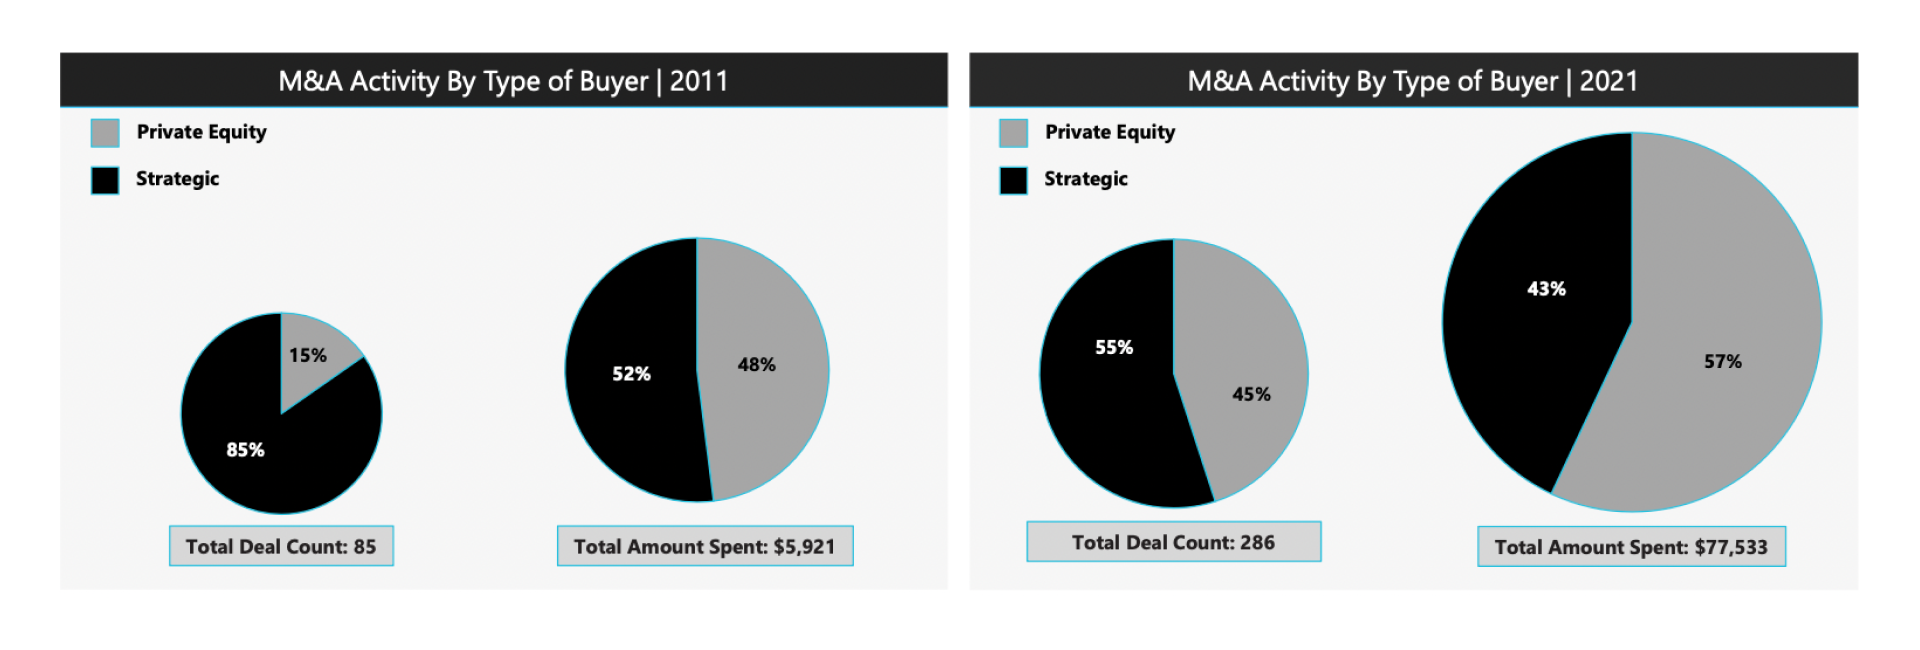 M&A activity by type of buyer, 2011 through 2021.